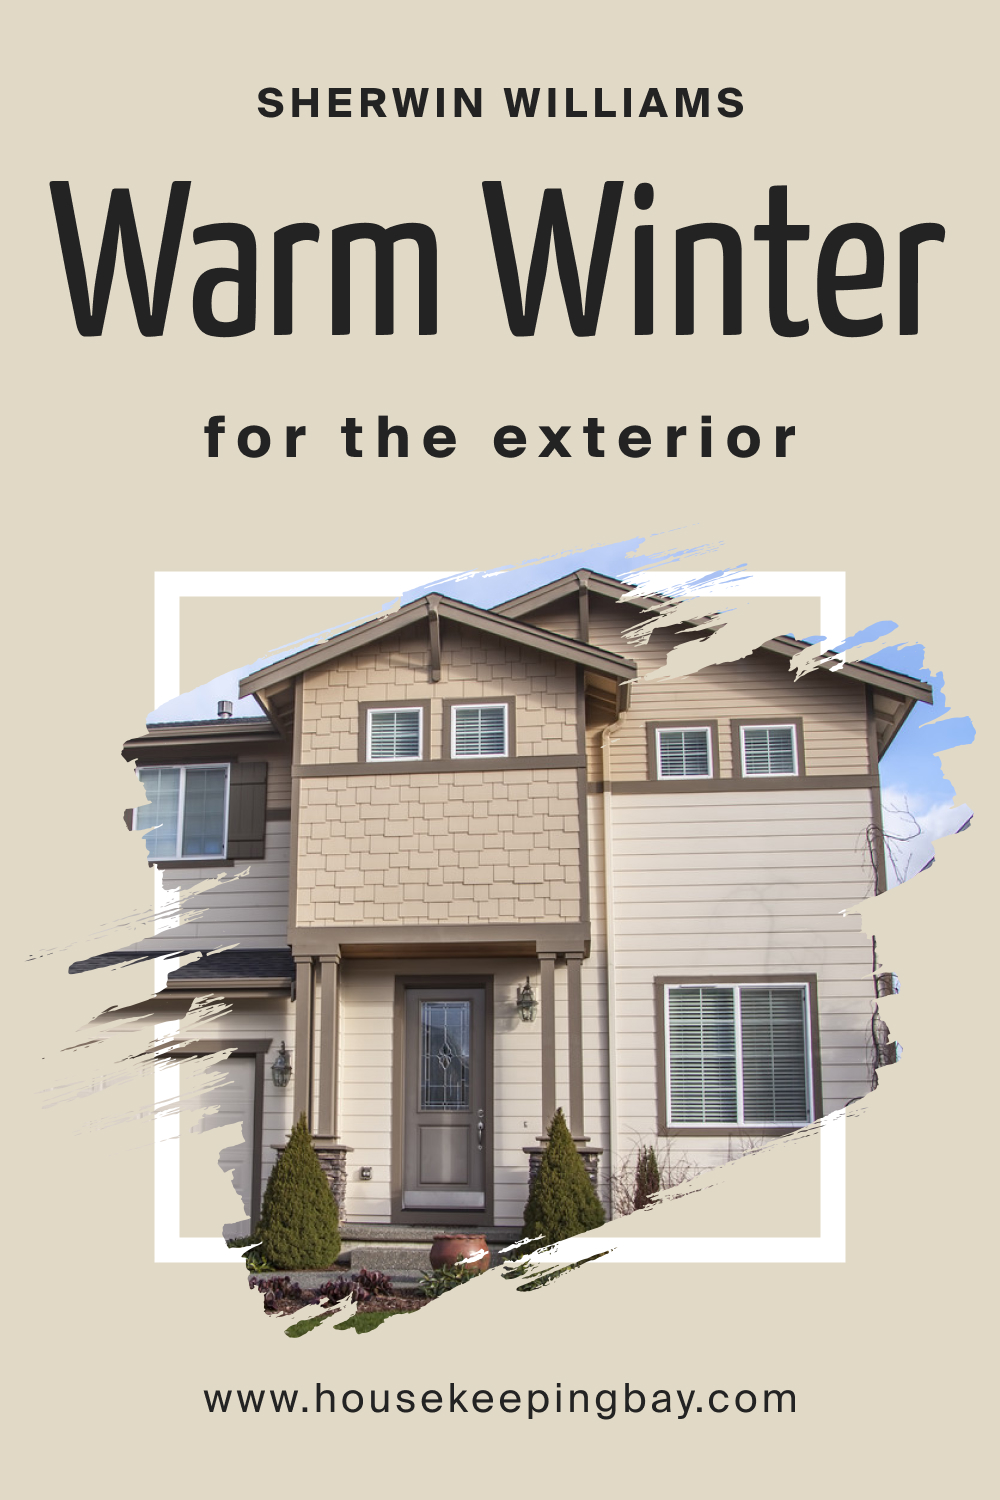 Sherwin Williams. SW 9506 Warm Winter For the exterior